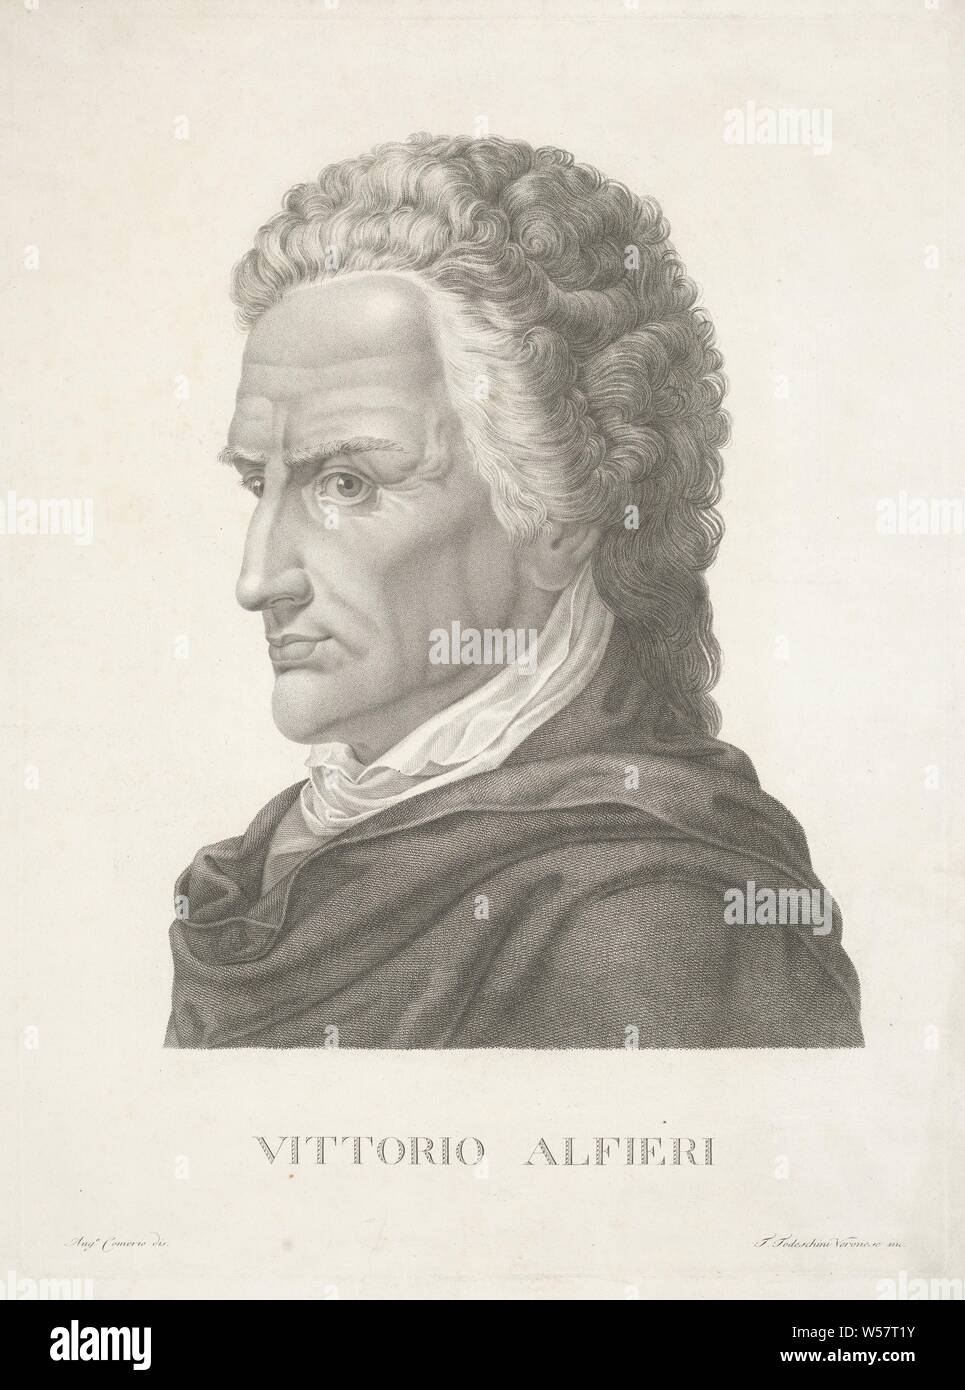 Portrait of writer, poet and actor Vittorio Alfieri, historical persons, portrait of a writer, Vittorio Alfieri, Tomaso Todeschini (mentioned on object), Italy, 1800 - 1899, paper, engraving, h 570 mm × w 422 mm Stock Photo